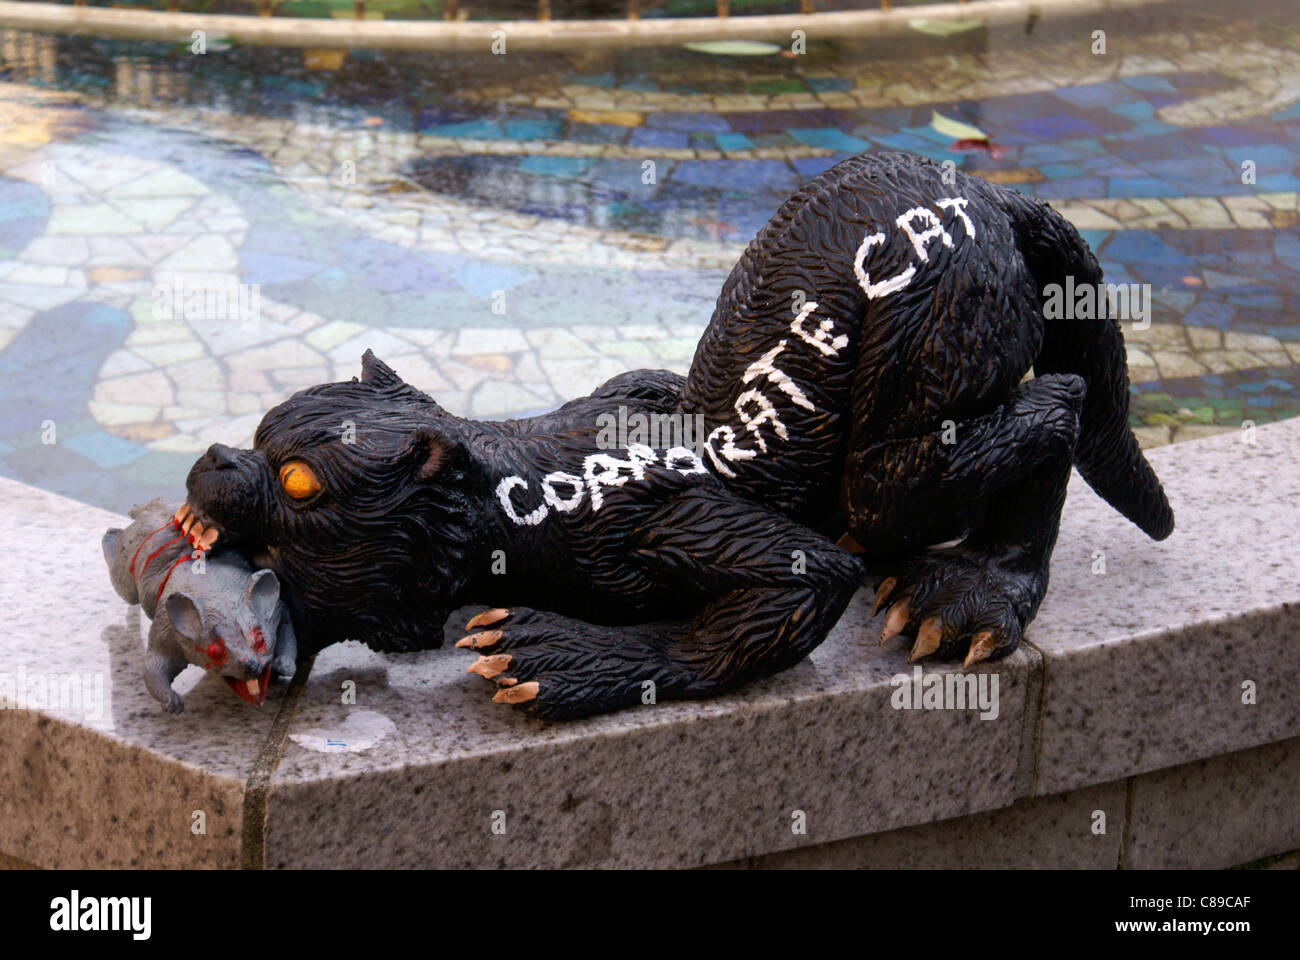 Corporate fat cat effigy at the Occupy Vancouver rally in Vancouver, British Columbia, Canada. Stock Photo